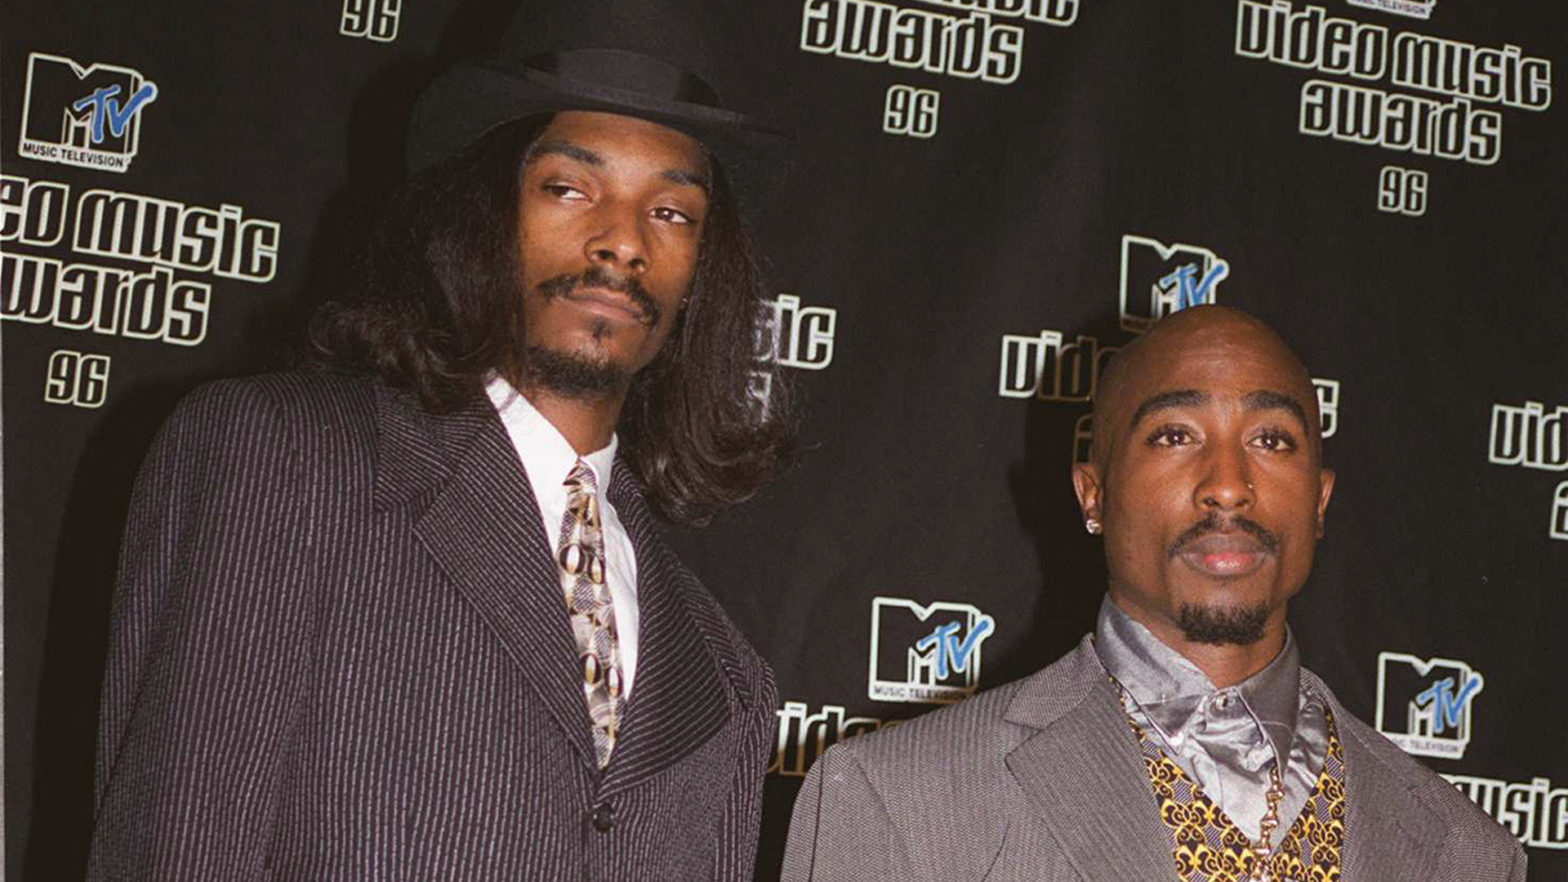 Snoop Dogg Has Acquired Death Row Records — Here's A Brief Timeline Of His History With The Label